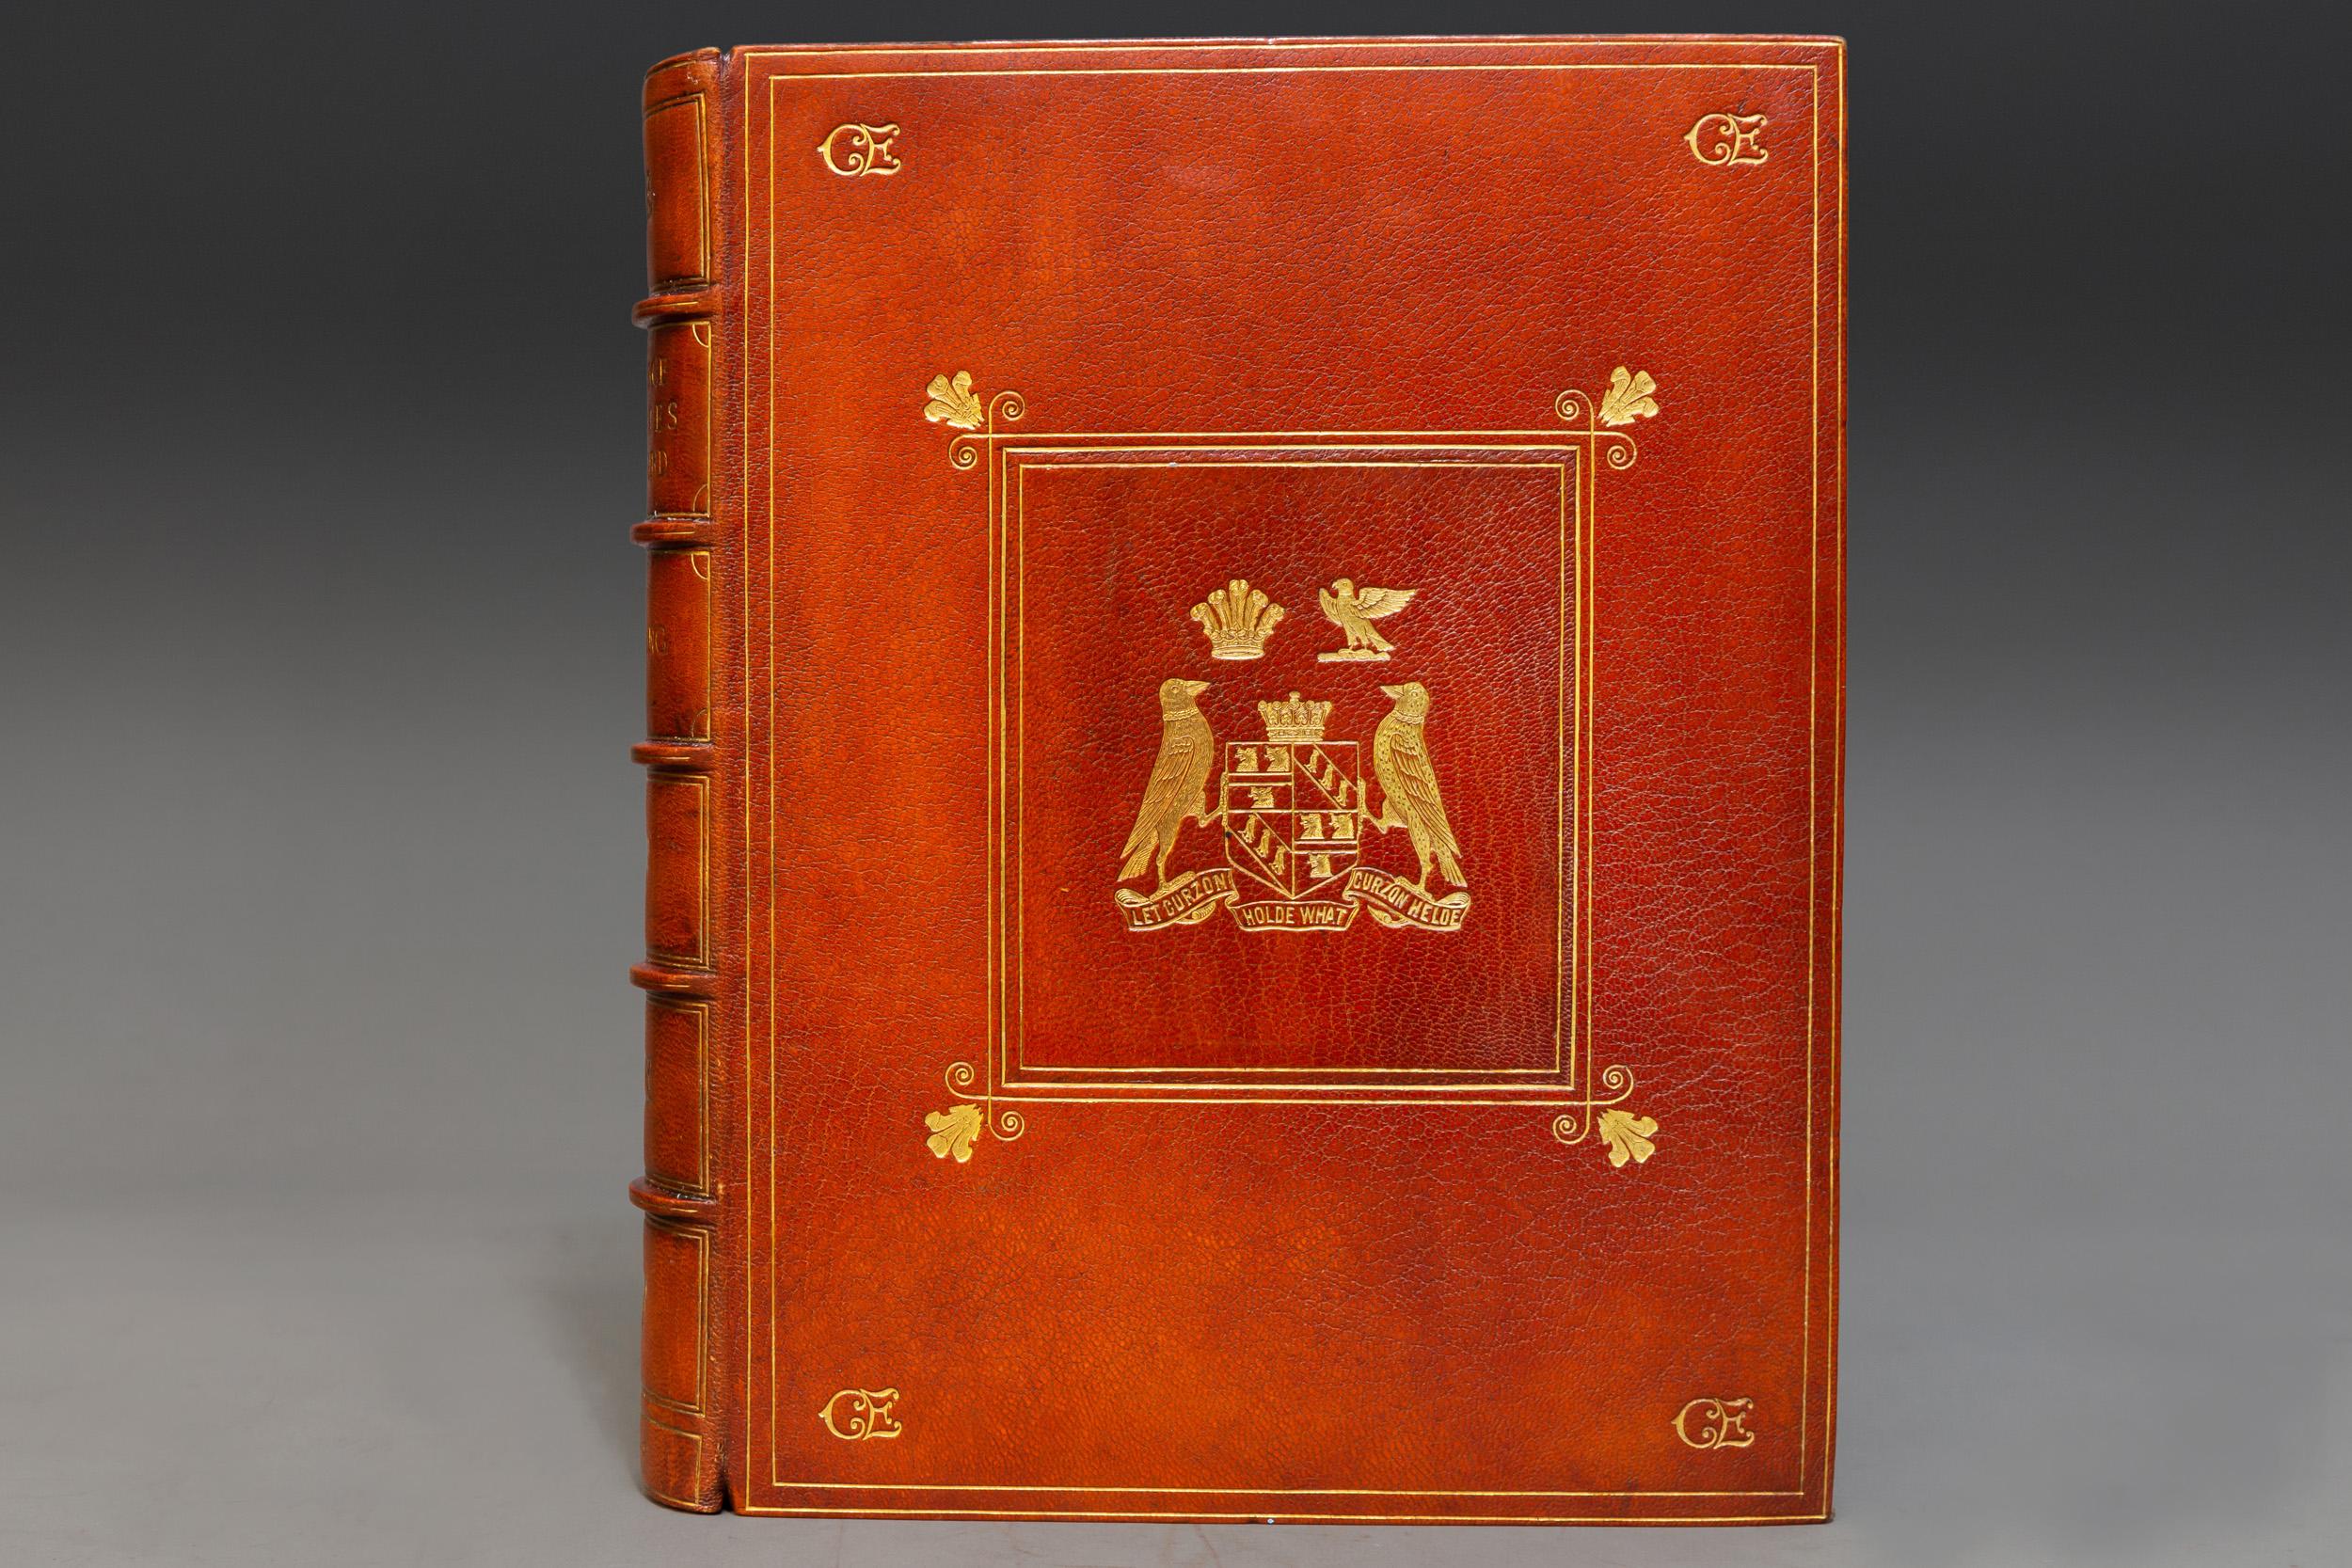 1 Volume

Bound in full tan Morocco by Bumpus, top edges gilt, raised bands, ornate gilt on cover and spine. Royal crest on front cover.

Illustrated, hand-colored frontispiece. 

Published: London, Paris: Goupil & Co. 1900.